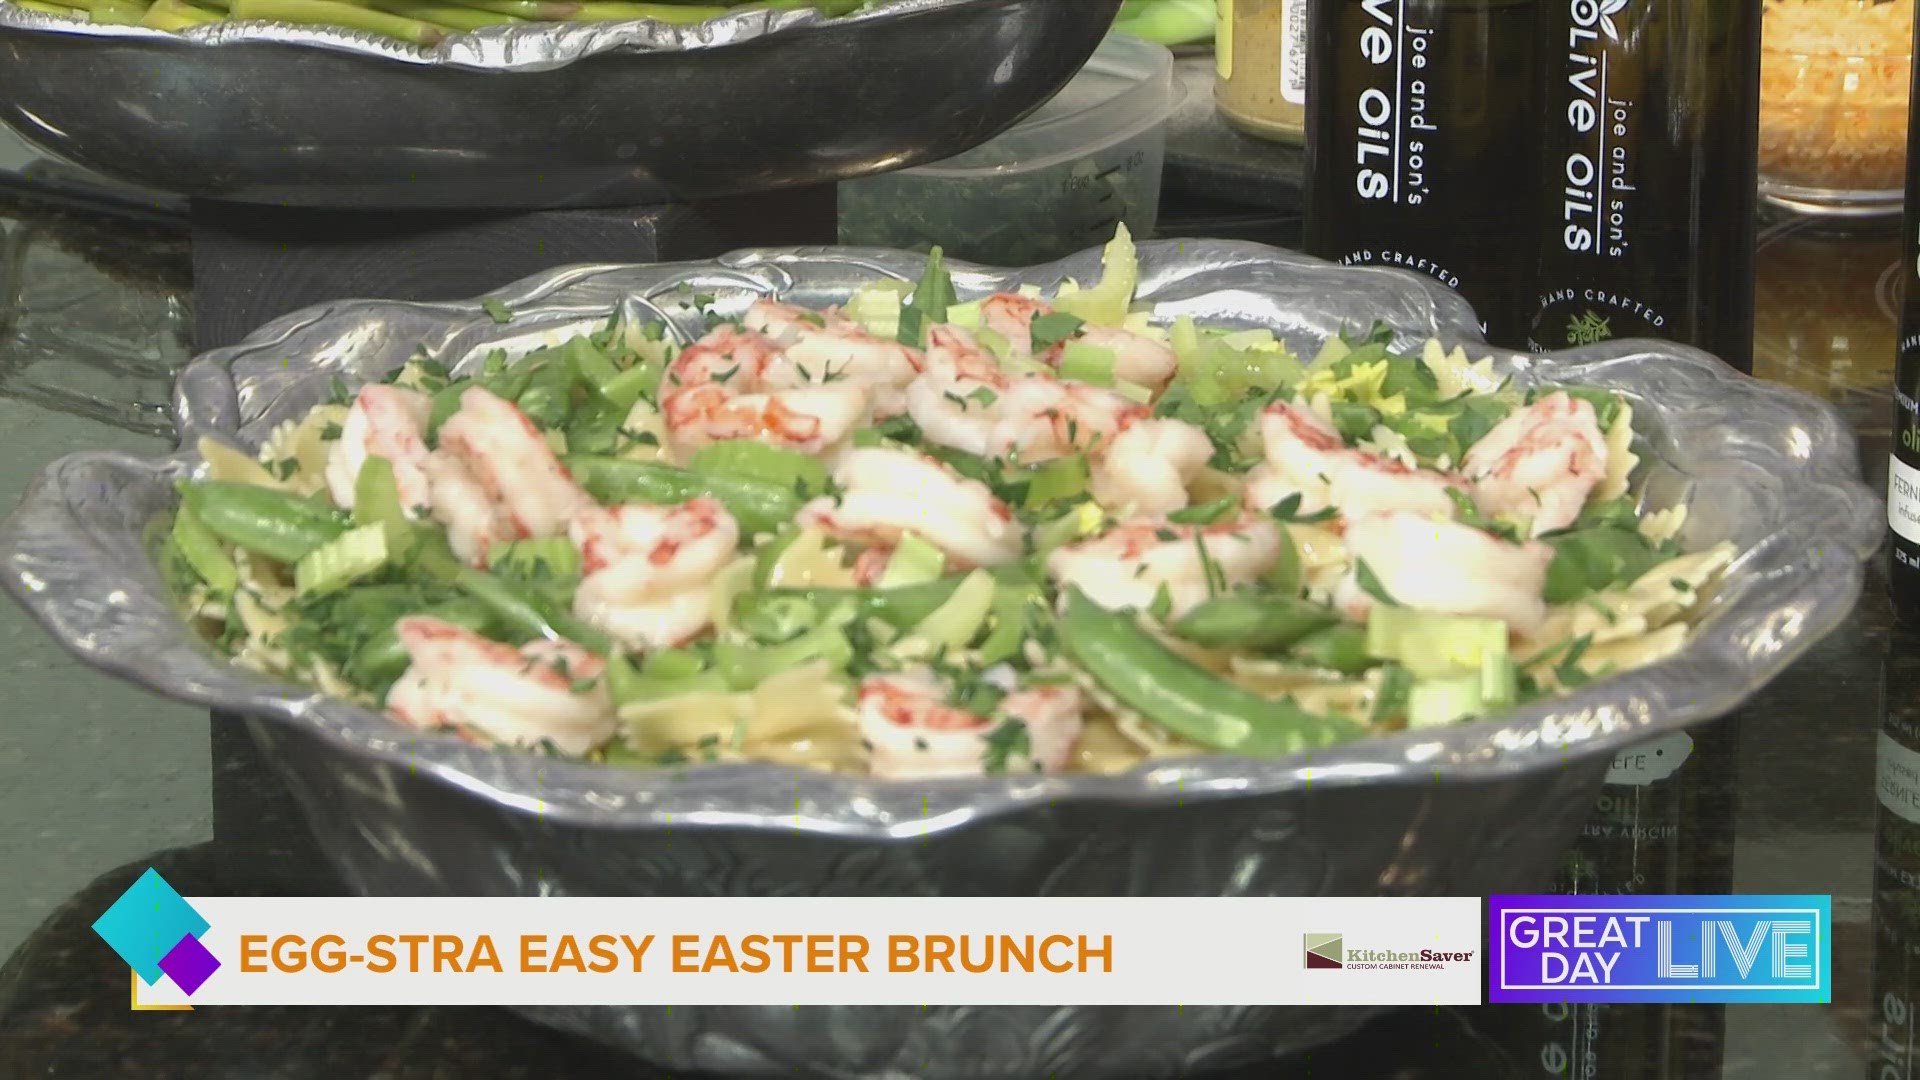 Andrea Messina with Joe and Sons Olive Oils shares easy Easter brunch recipes.